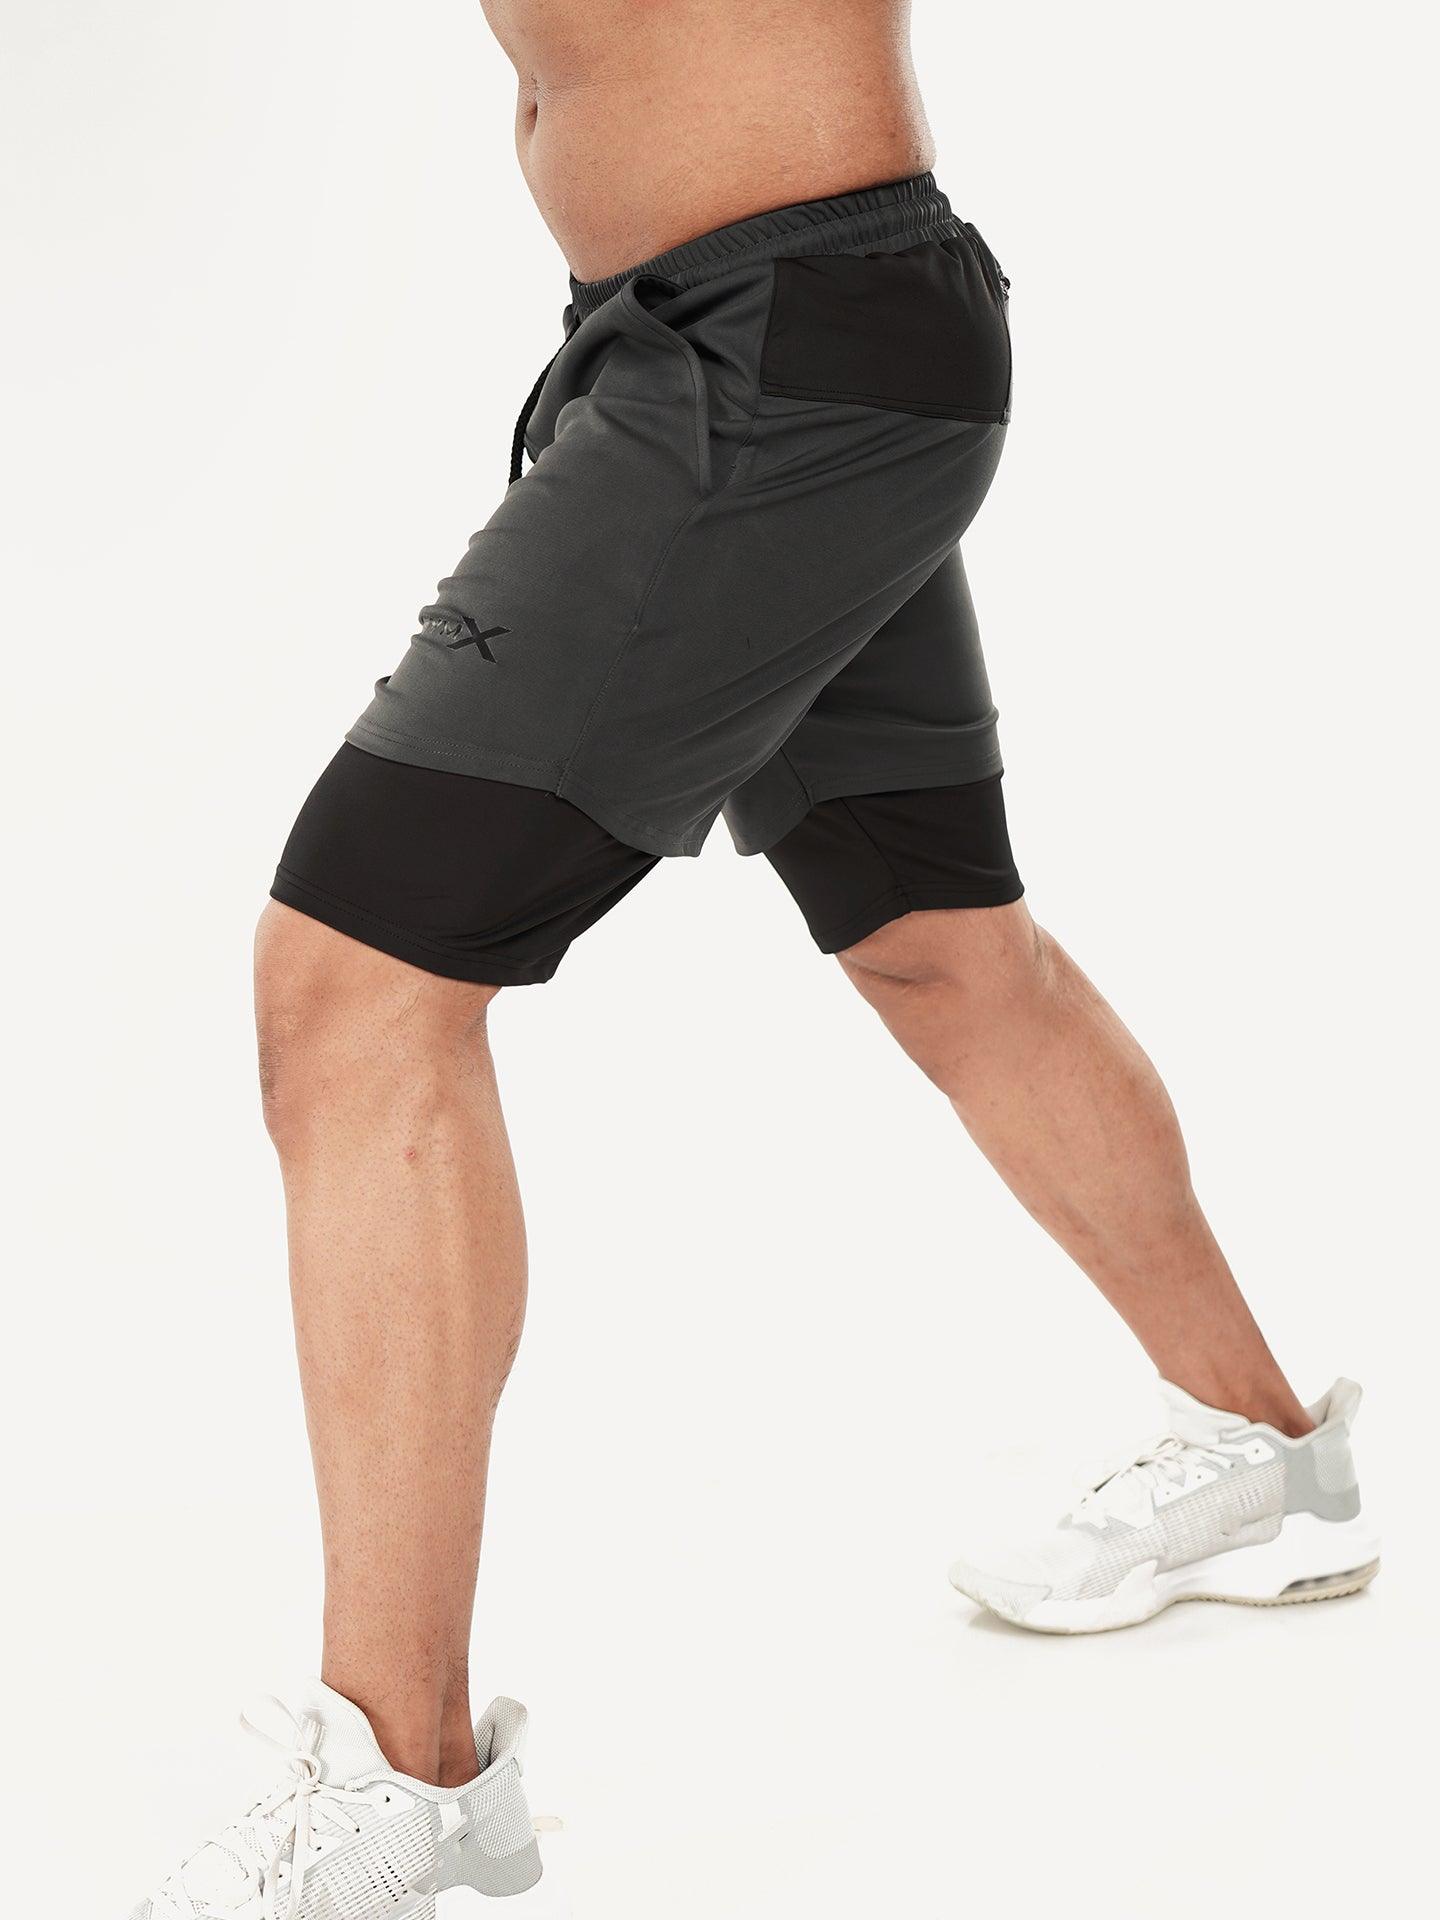 2-in-1 Shorts with phone pocket: Charcoal Grey- Sale - GymX